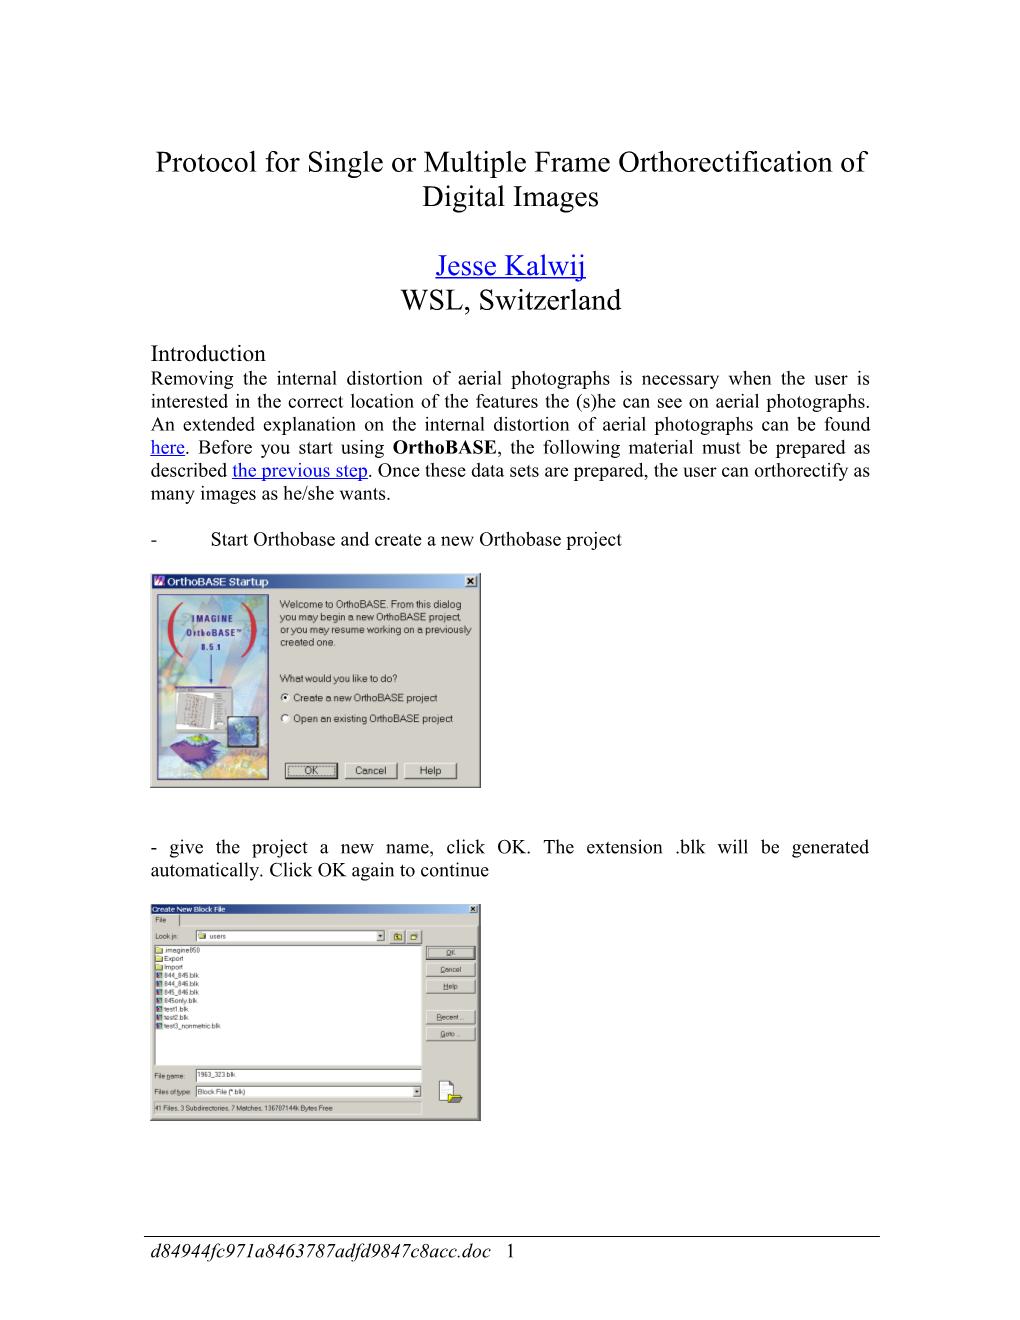 Protocol for Single Frame Ortho-Rectification of Digital Imagery